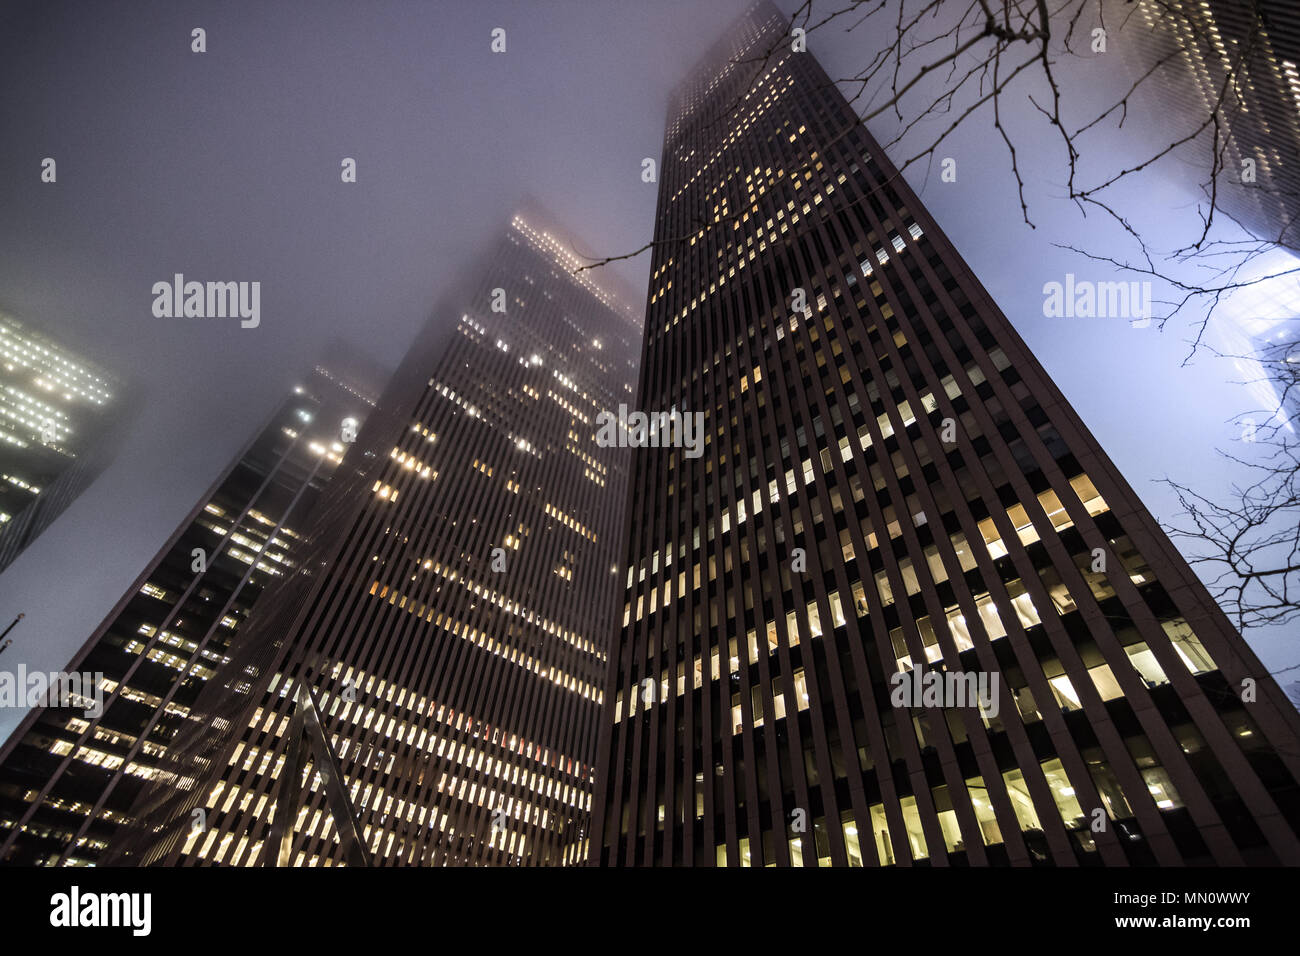 New York, US - March 30, 2018:  Skyscrapers obscured by heavy fog at night in New York city Stock Photo